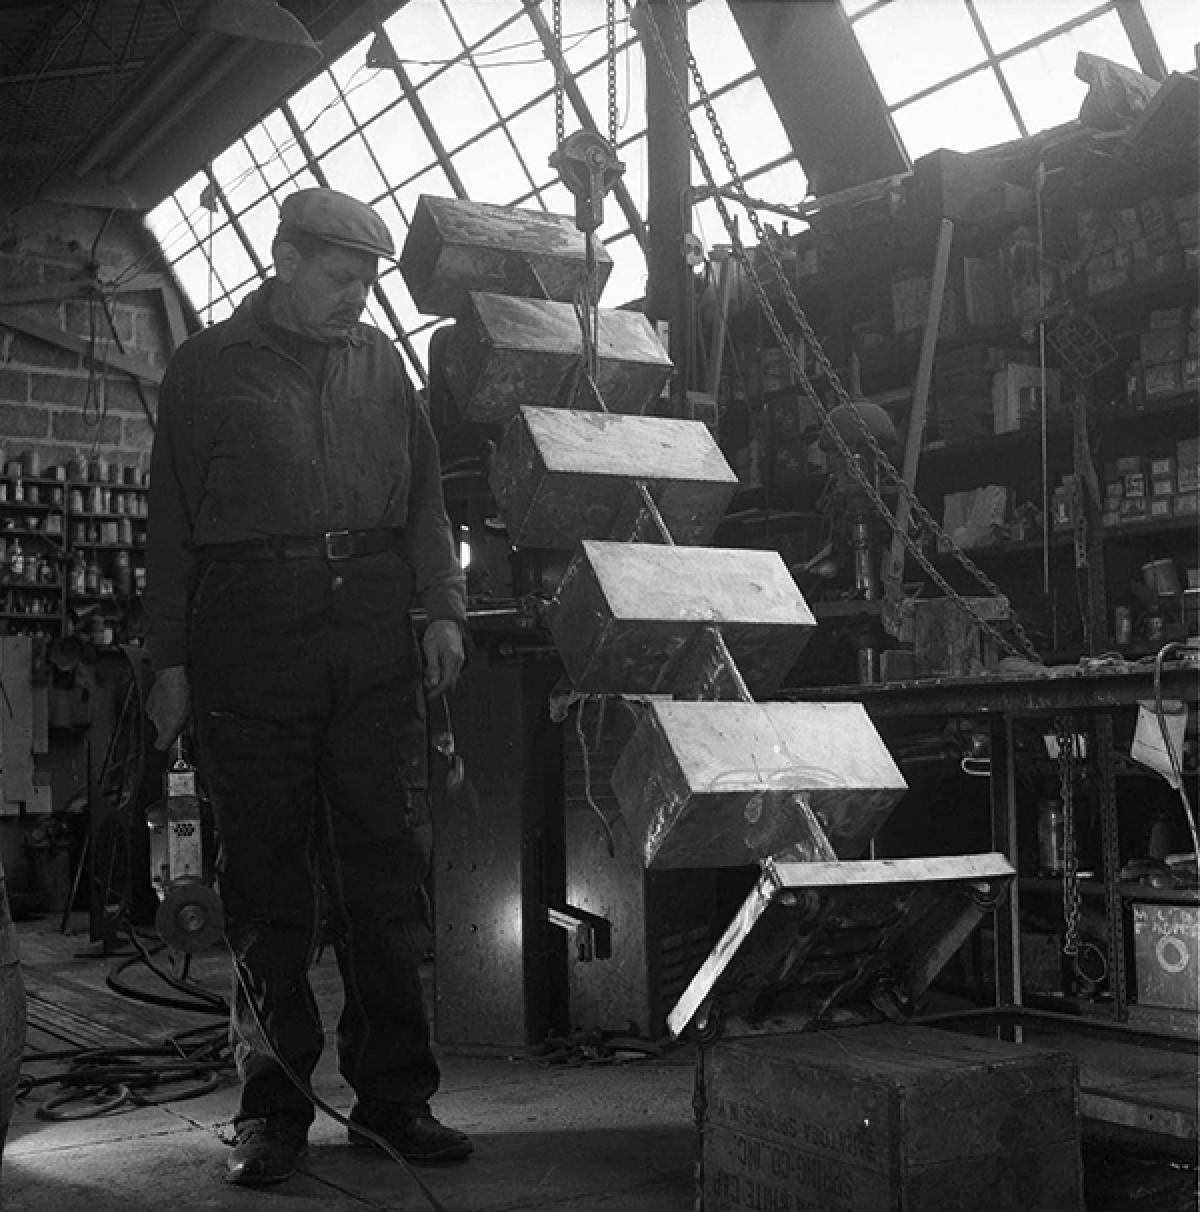 David Smith overseeing the placement of <em>Five Units Equal </em>(1956) onto a base in his workshop at Bolton Landing, 1956